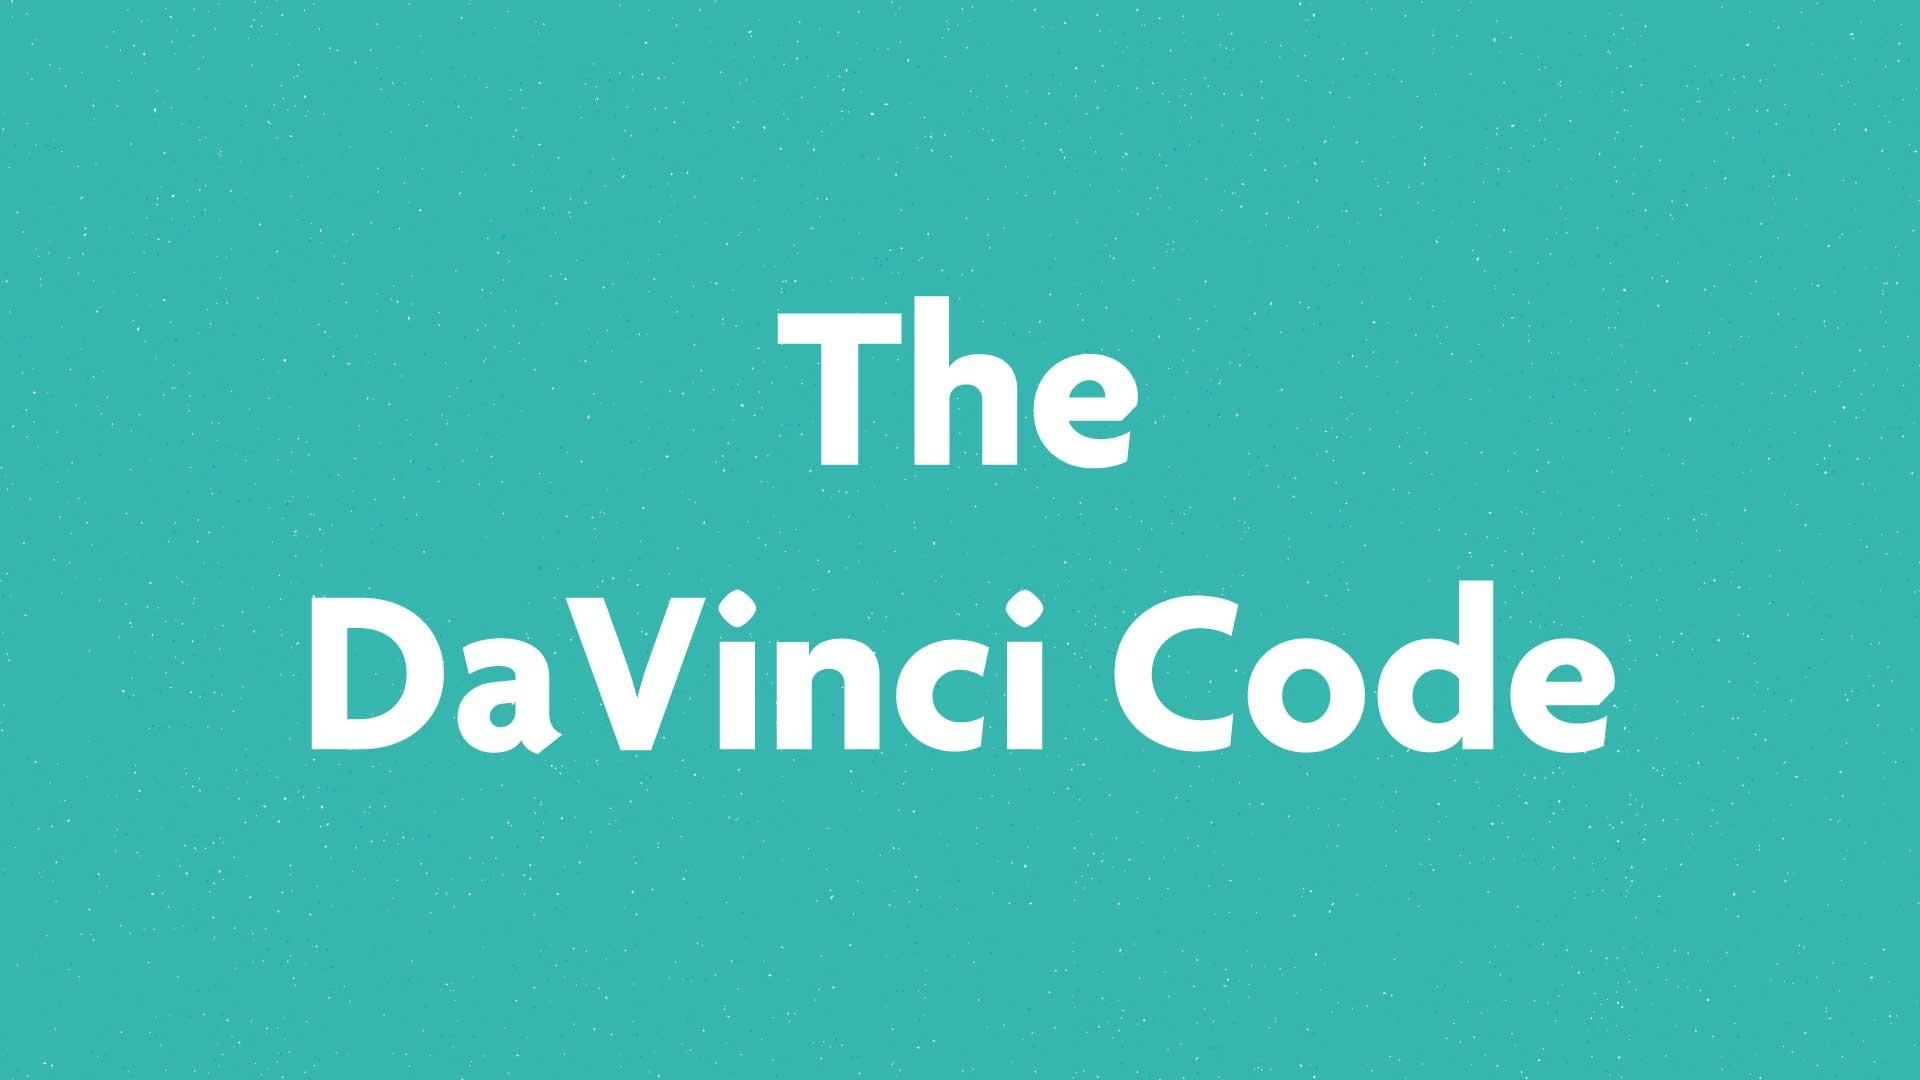 The DaVinci Code book submission card on a green background.